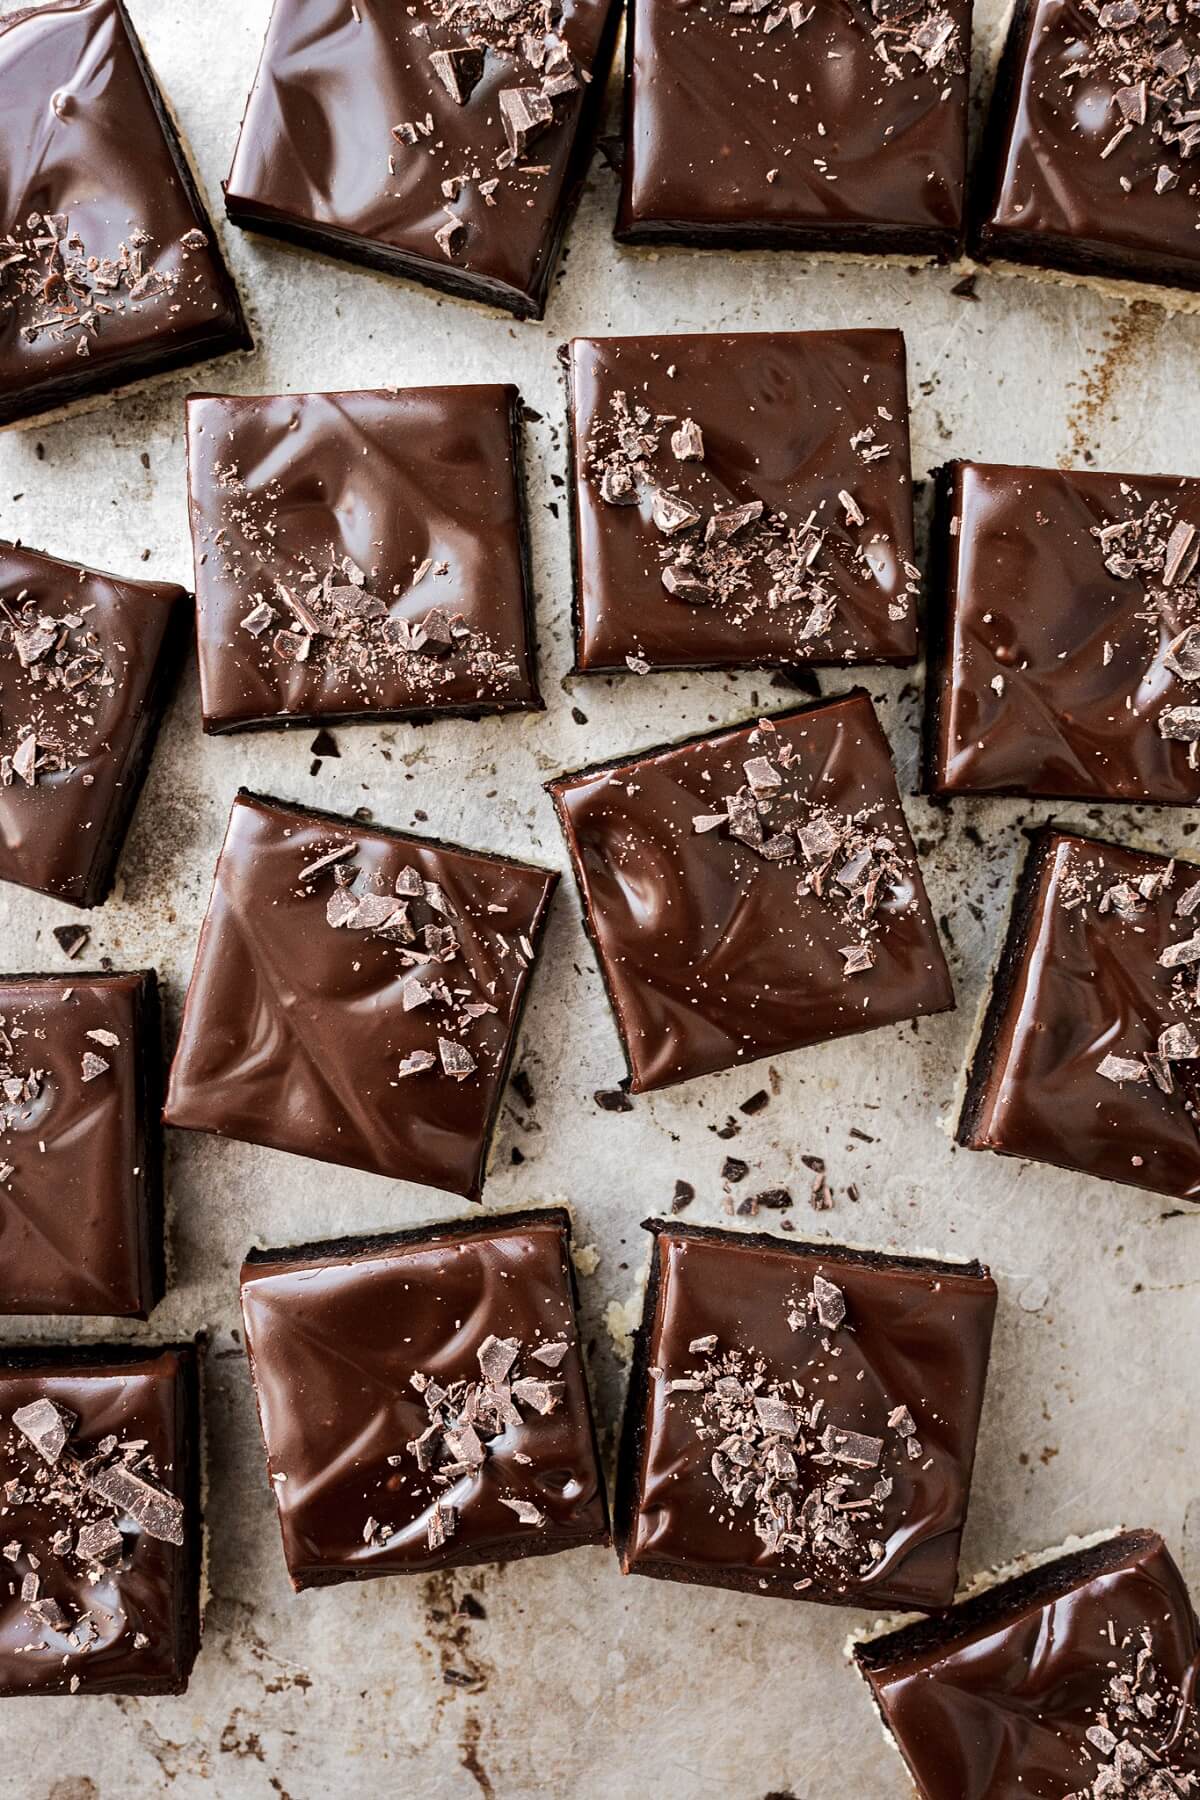 Shortbread brownies topped with ganache and chopped chocolate.